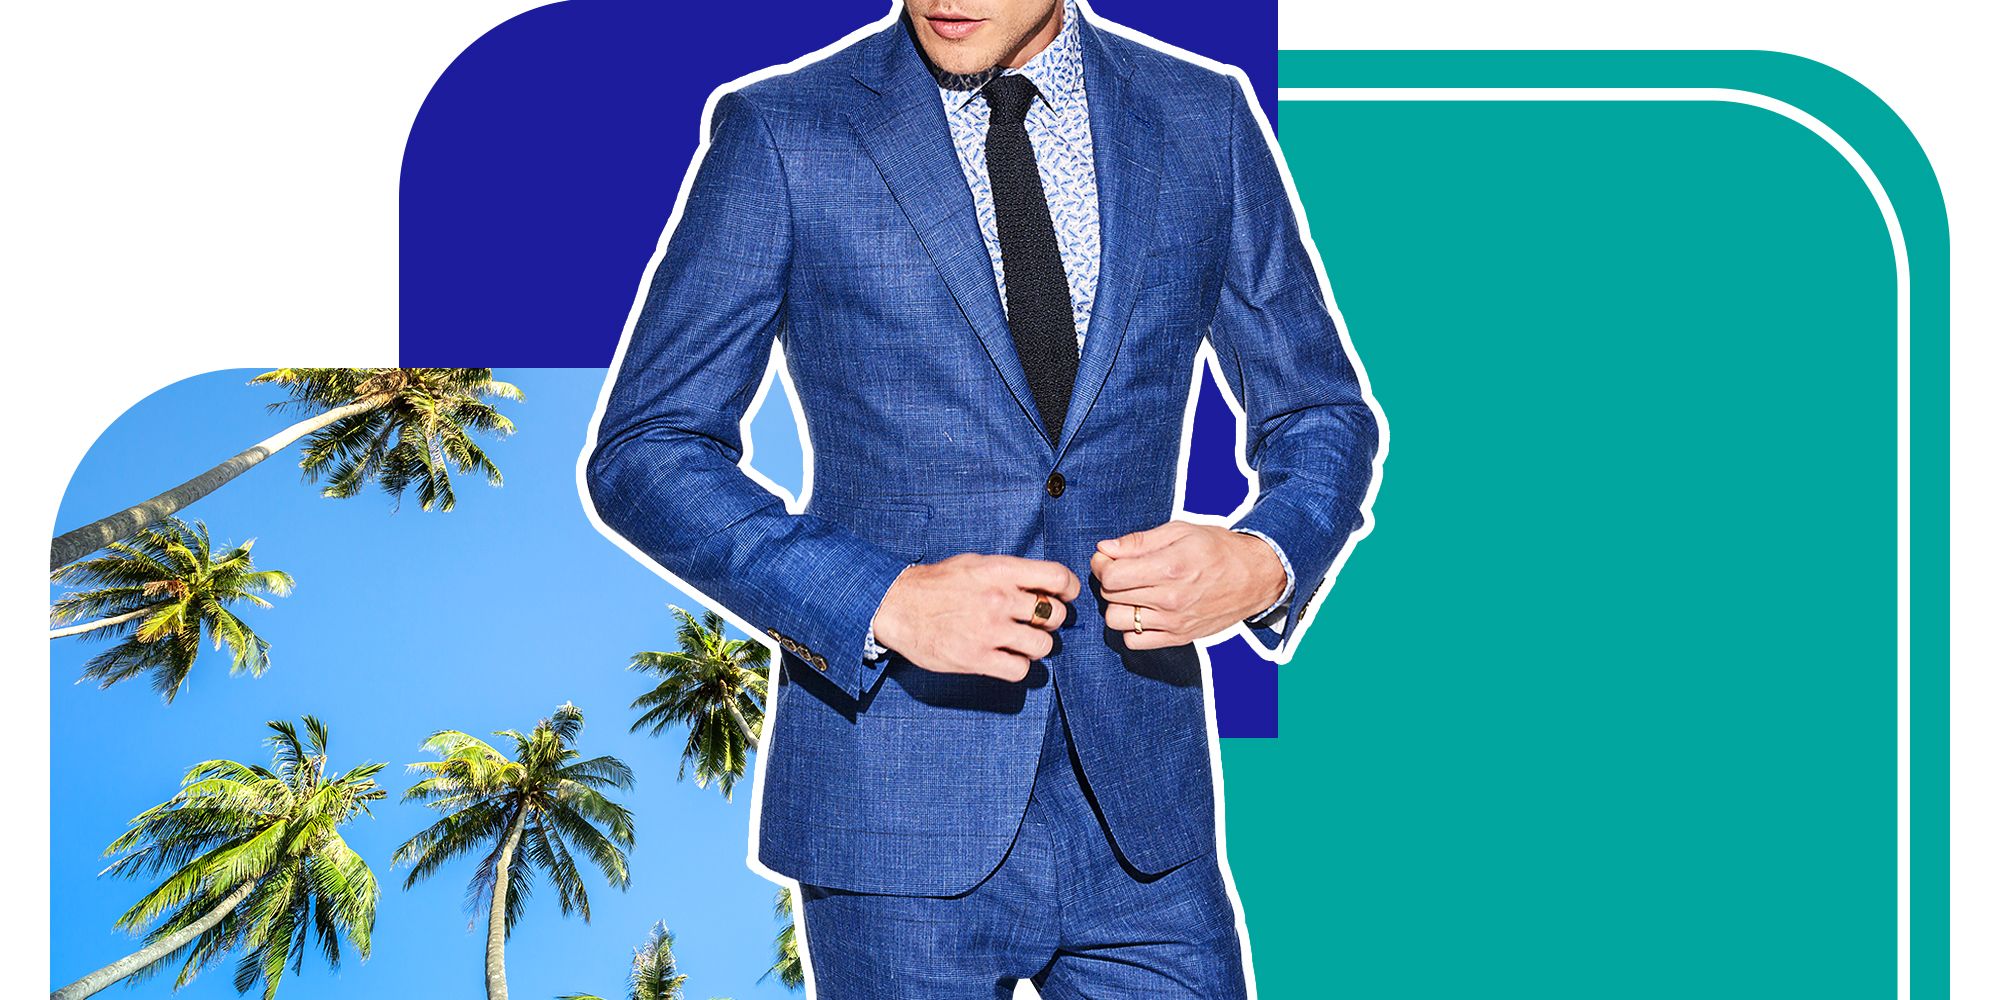 INDOCHINO - Make a splash with one of our vivid blue Summer suits (we don't  suggest the pool bit). Available in-store and online:  https://bddy.me/2Xi3zmR #IndochinoSS19 | Facebook